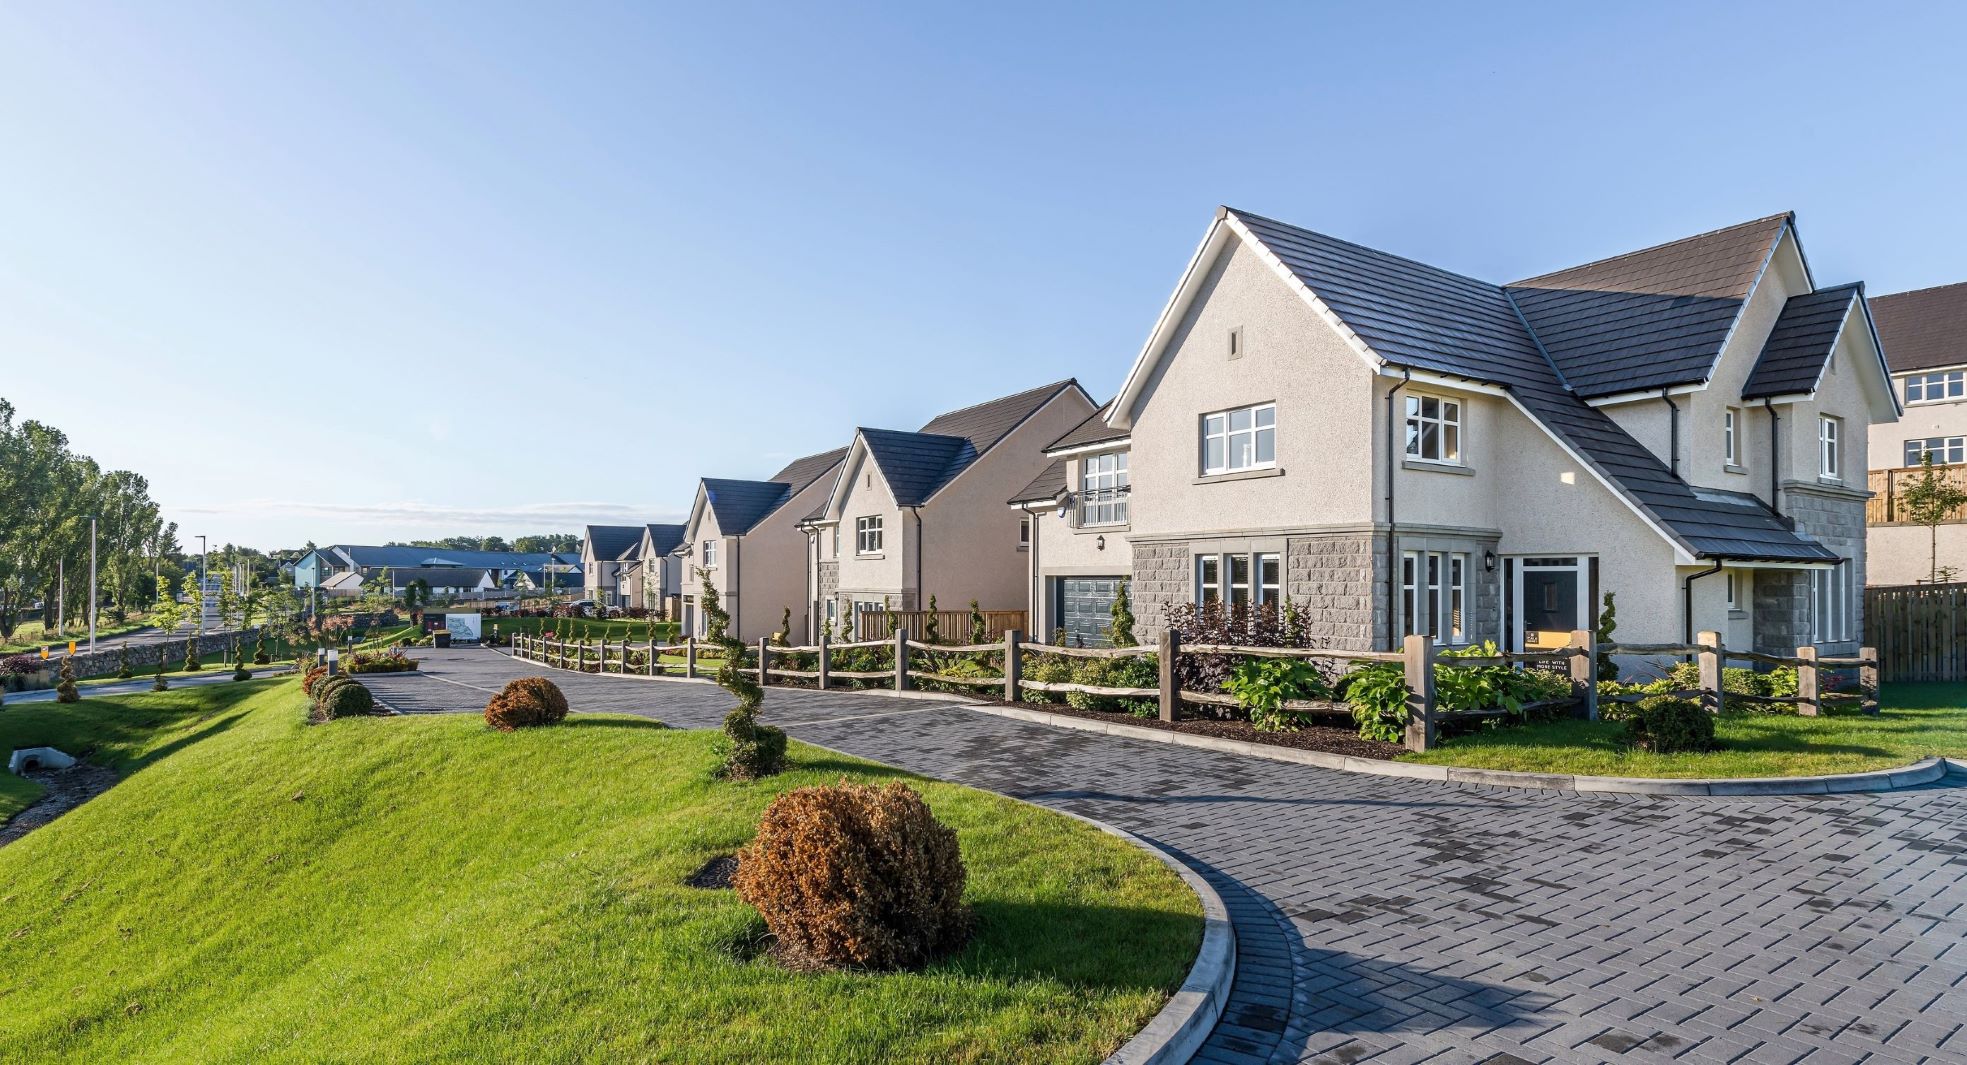 Cala Homes embarks on five-year plan with rebrand